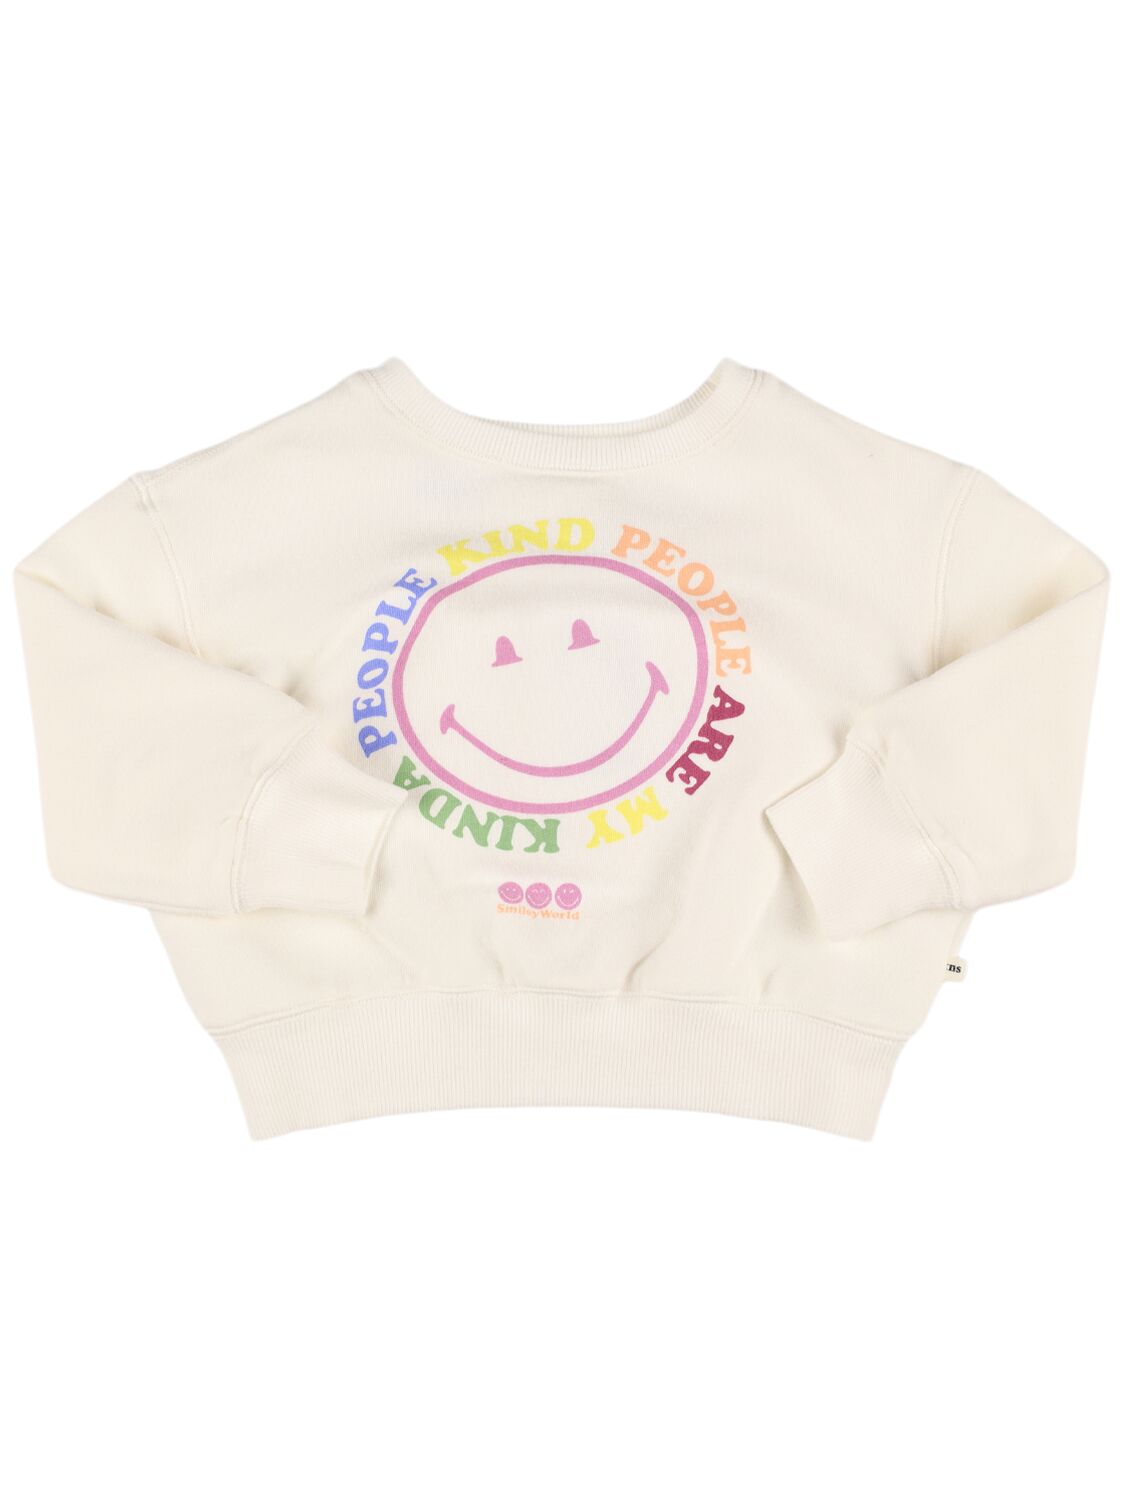 The New Society Kids' Printed Bci Cotton Crewneck Sweatshirt In Off White